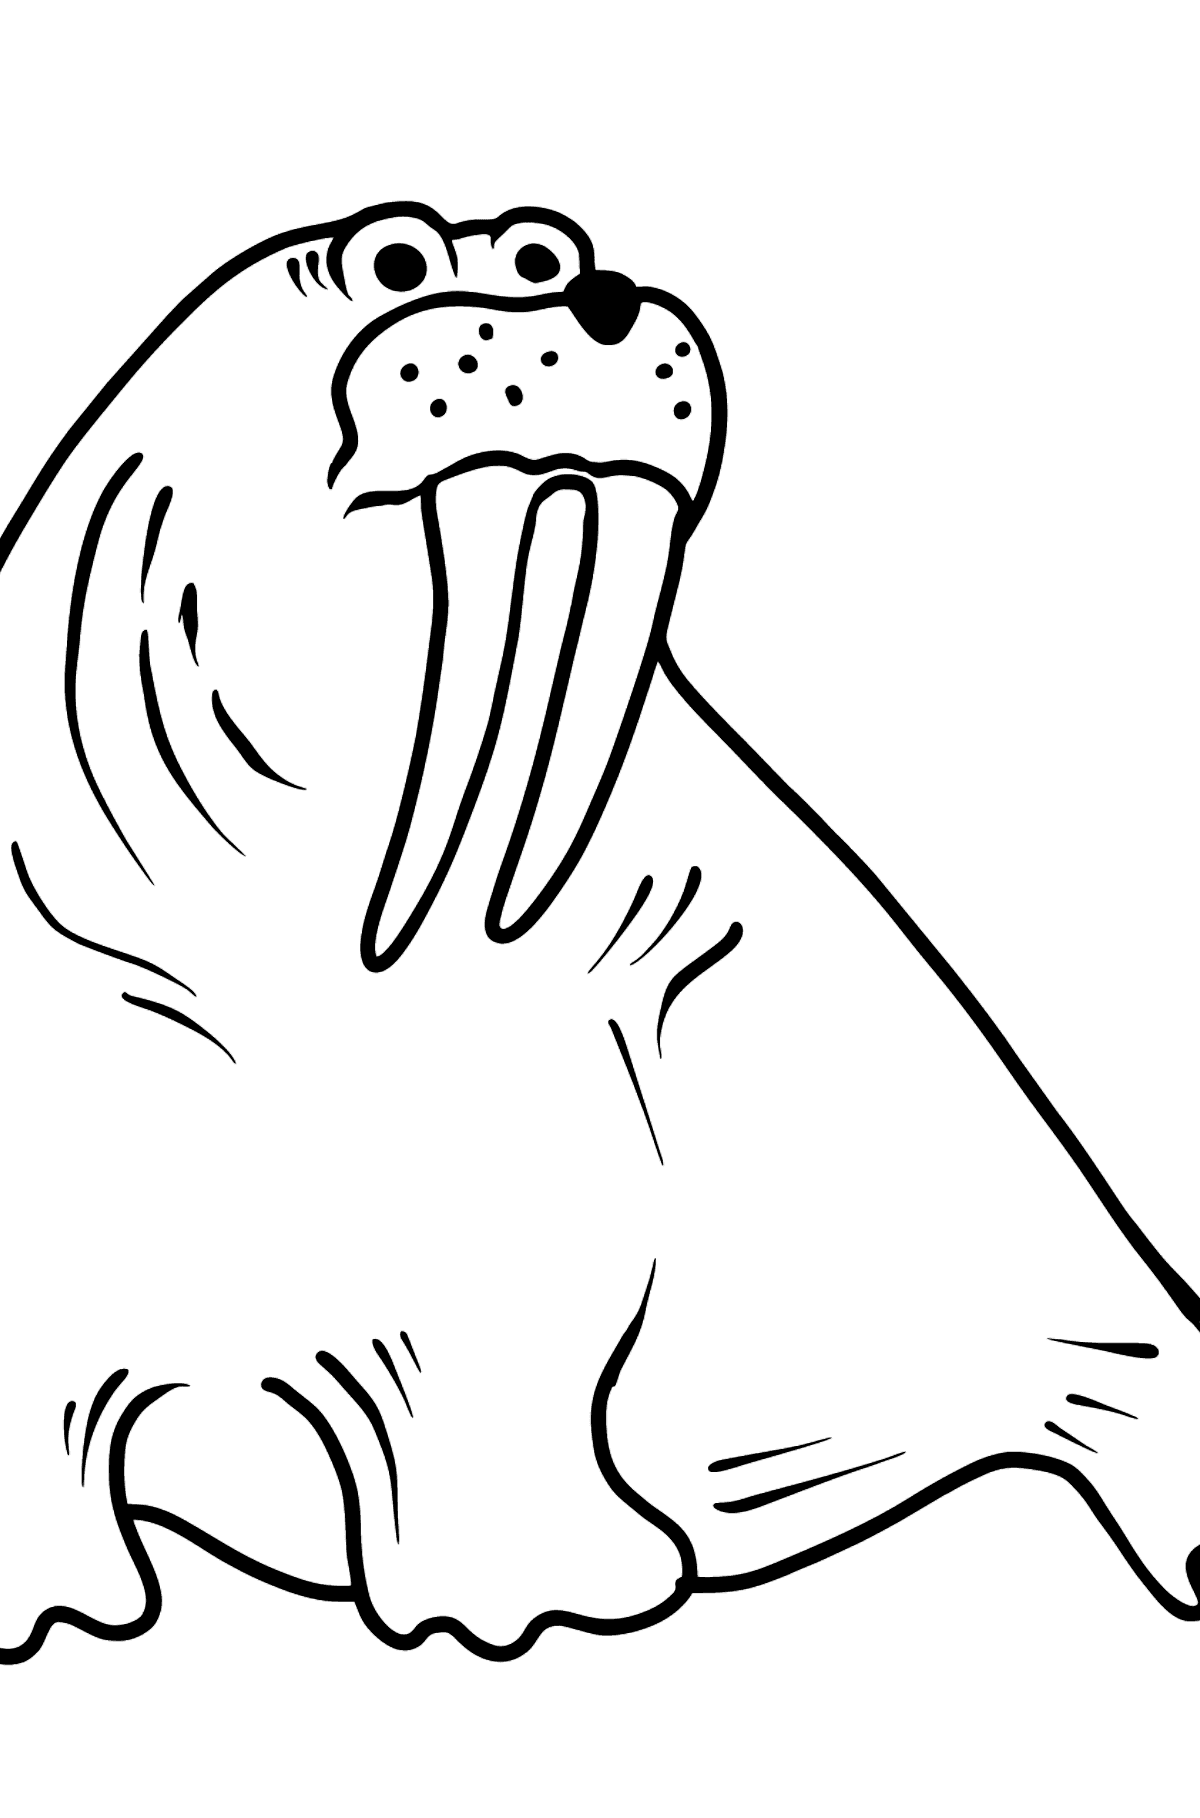 Walrus coloring page - Coloring Pages for Kids